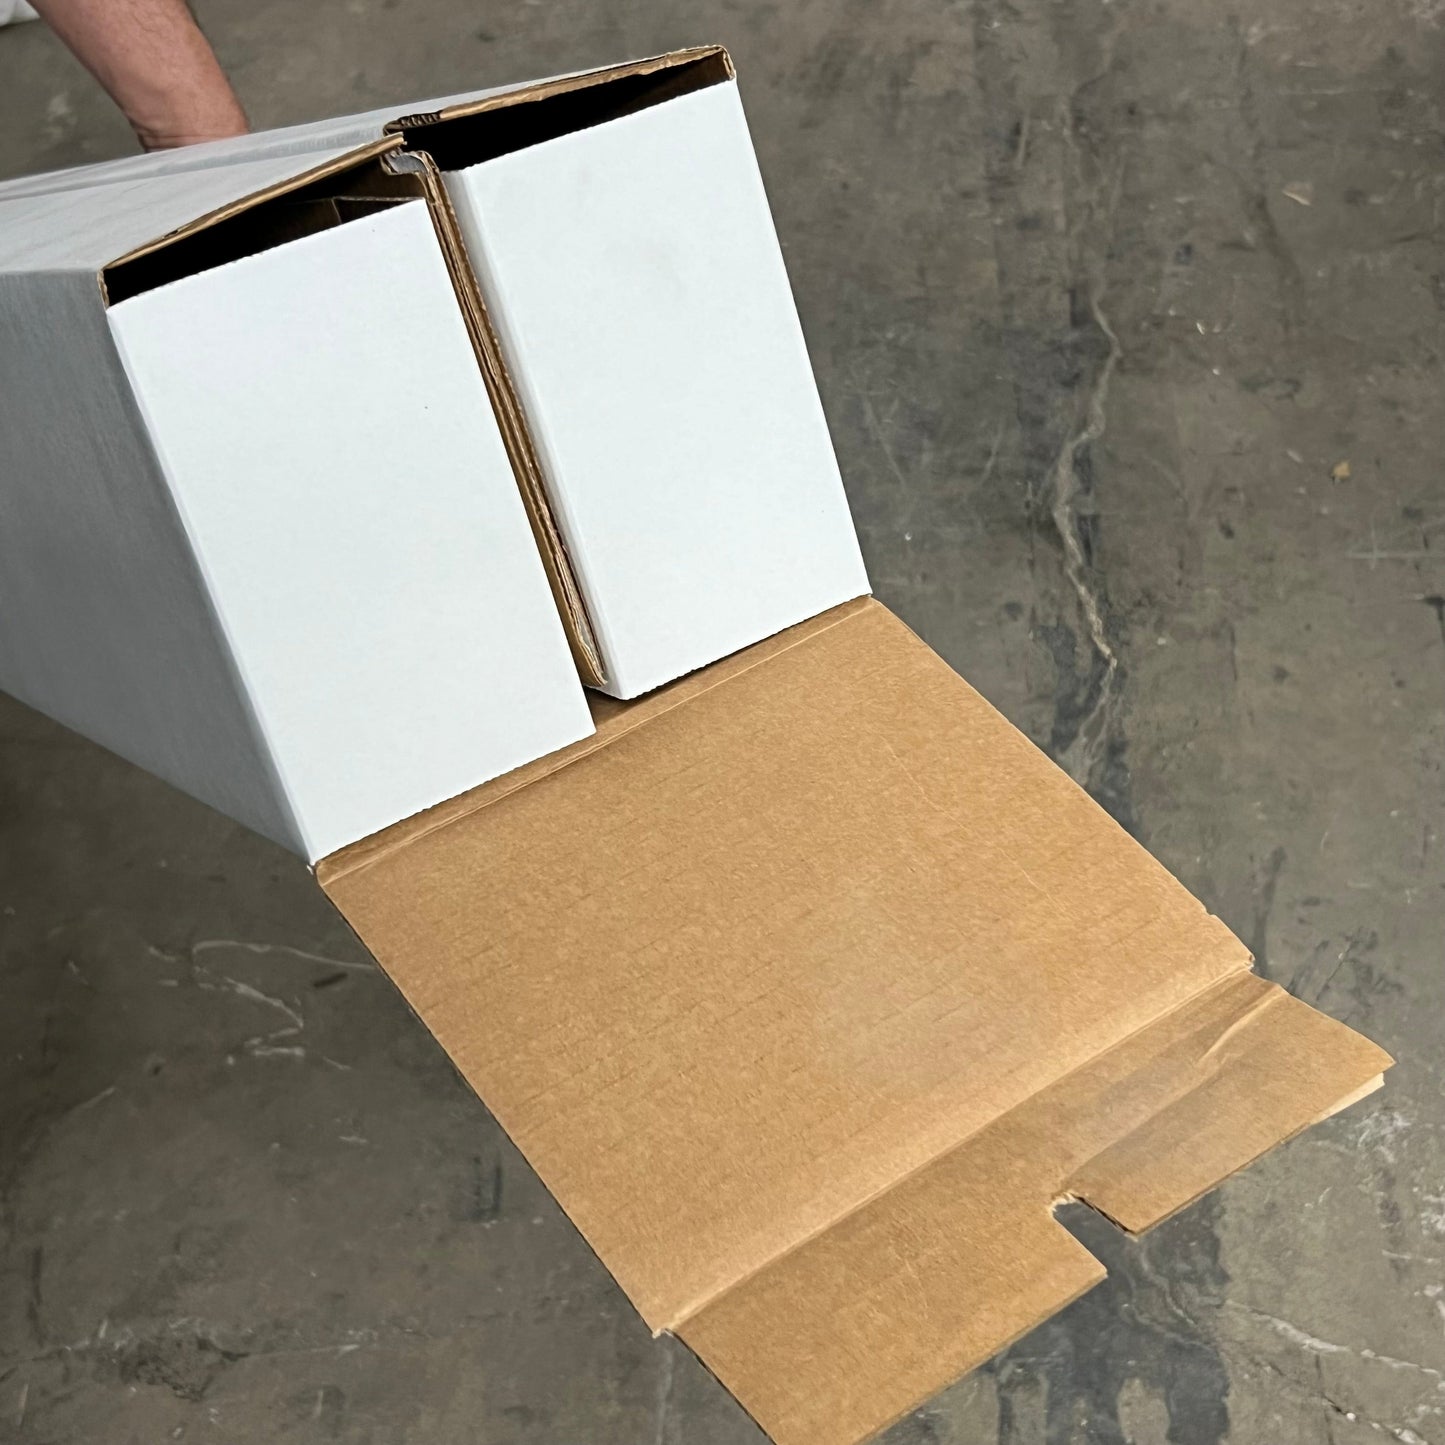 ZA@ POLYMERSHAPES (20 PACK) Riser Cardboard Boxes 72"x8"x7" White PPCA SPEC# 84249